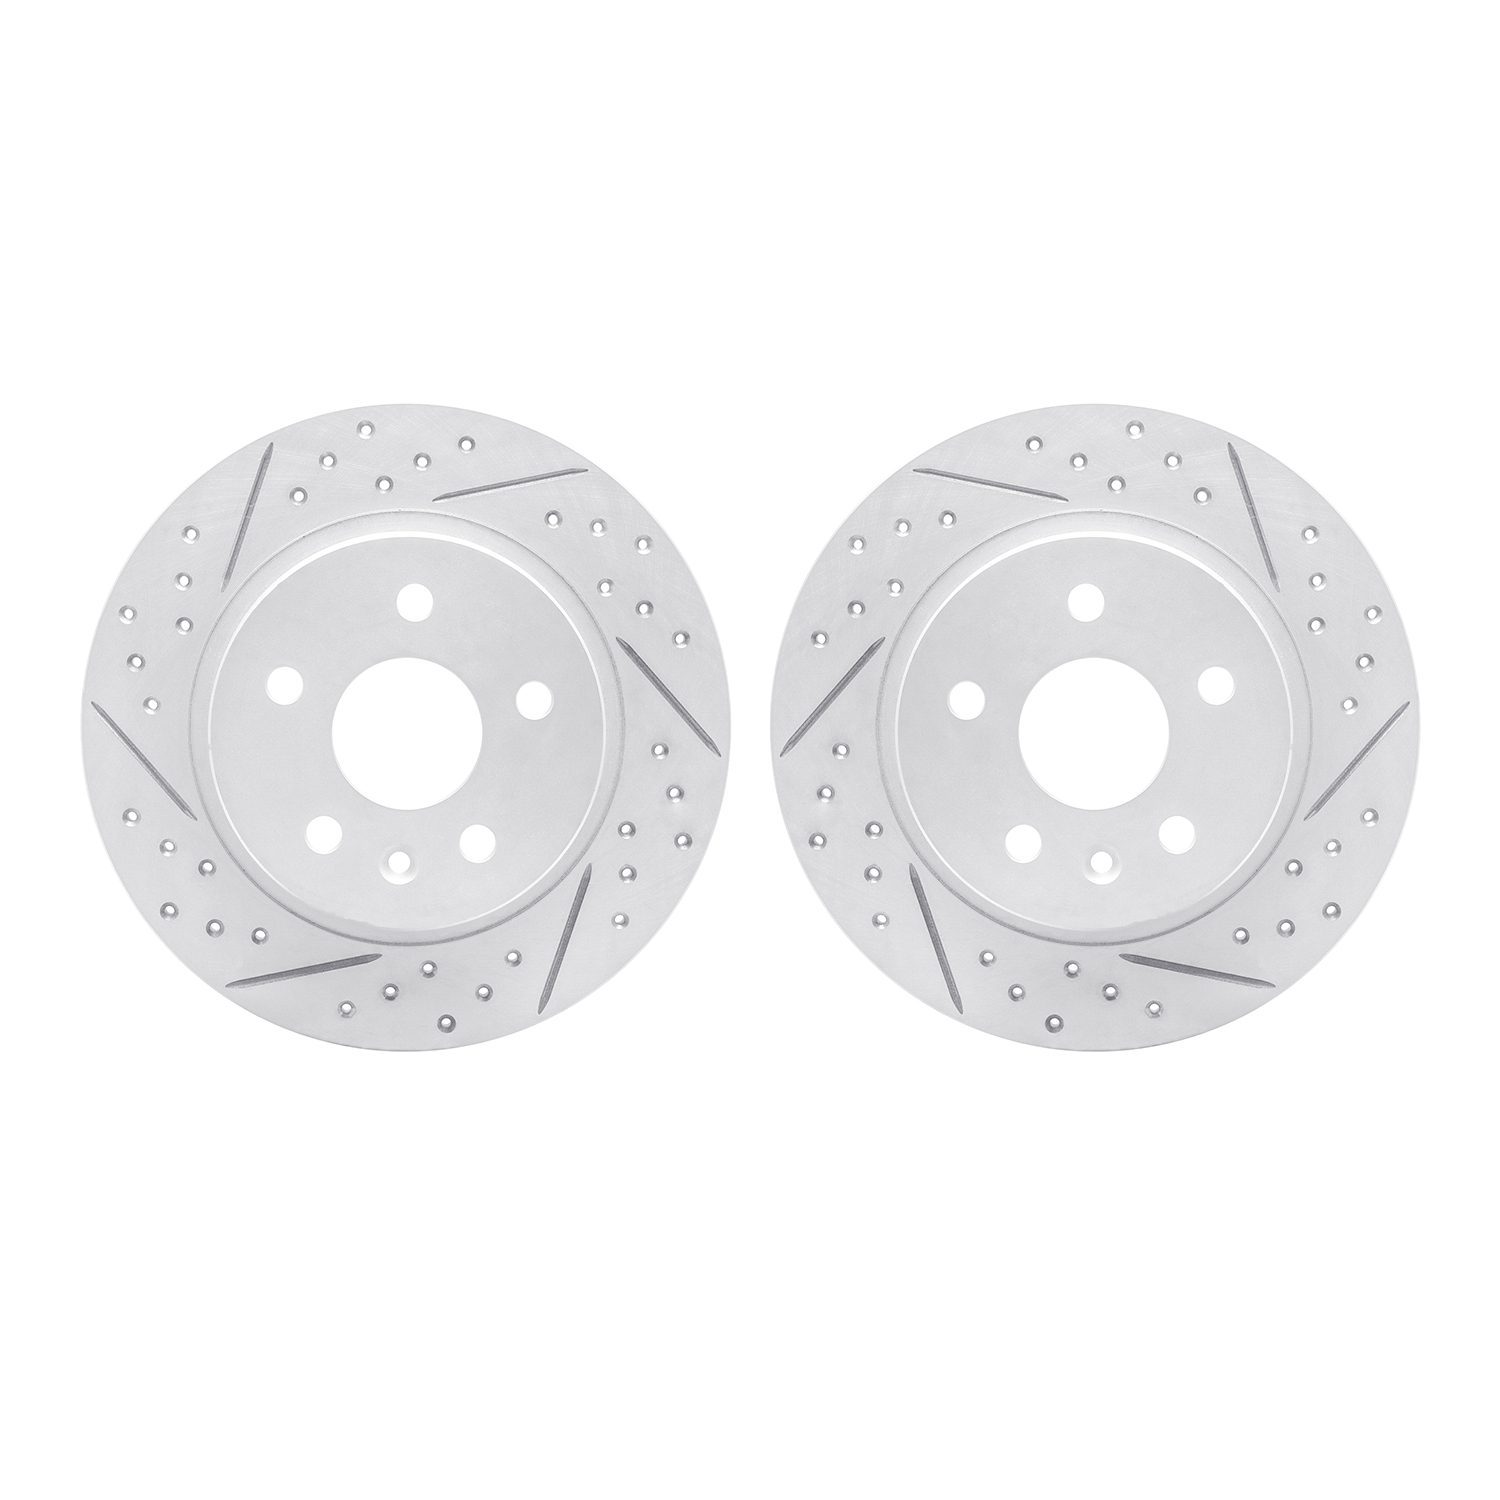 2002-45013 Geoperformance Drilled/Slotted Brake Rotors, Fits Select GM, Position: Rear